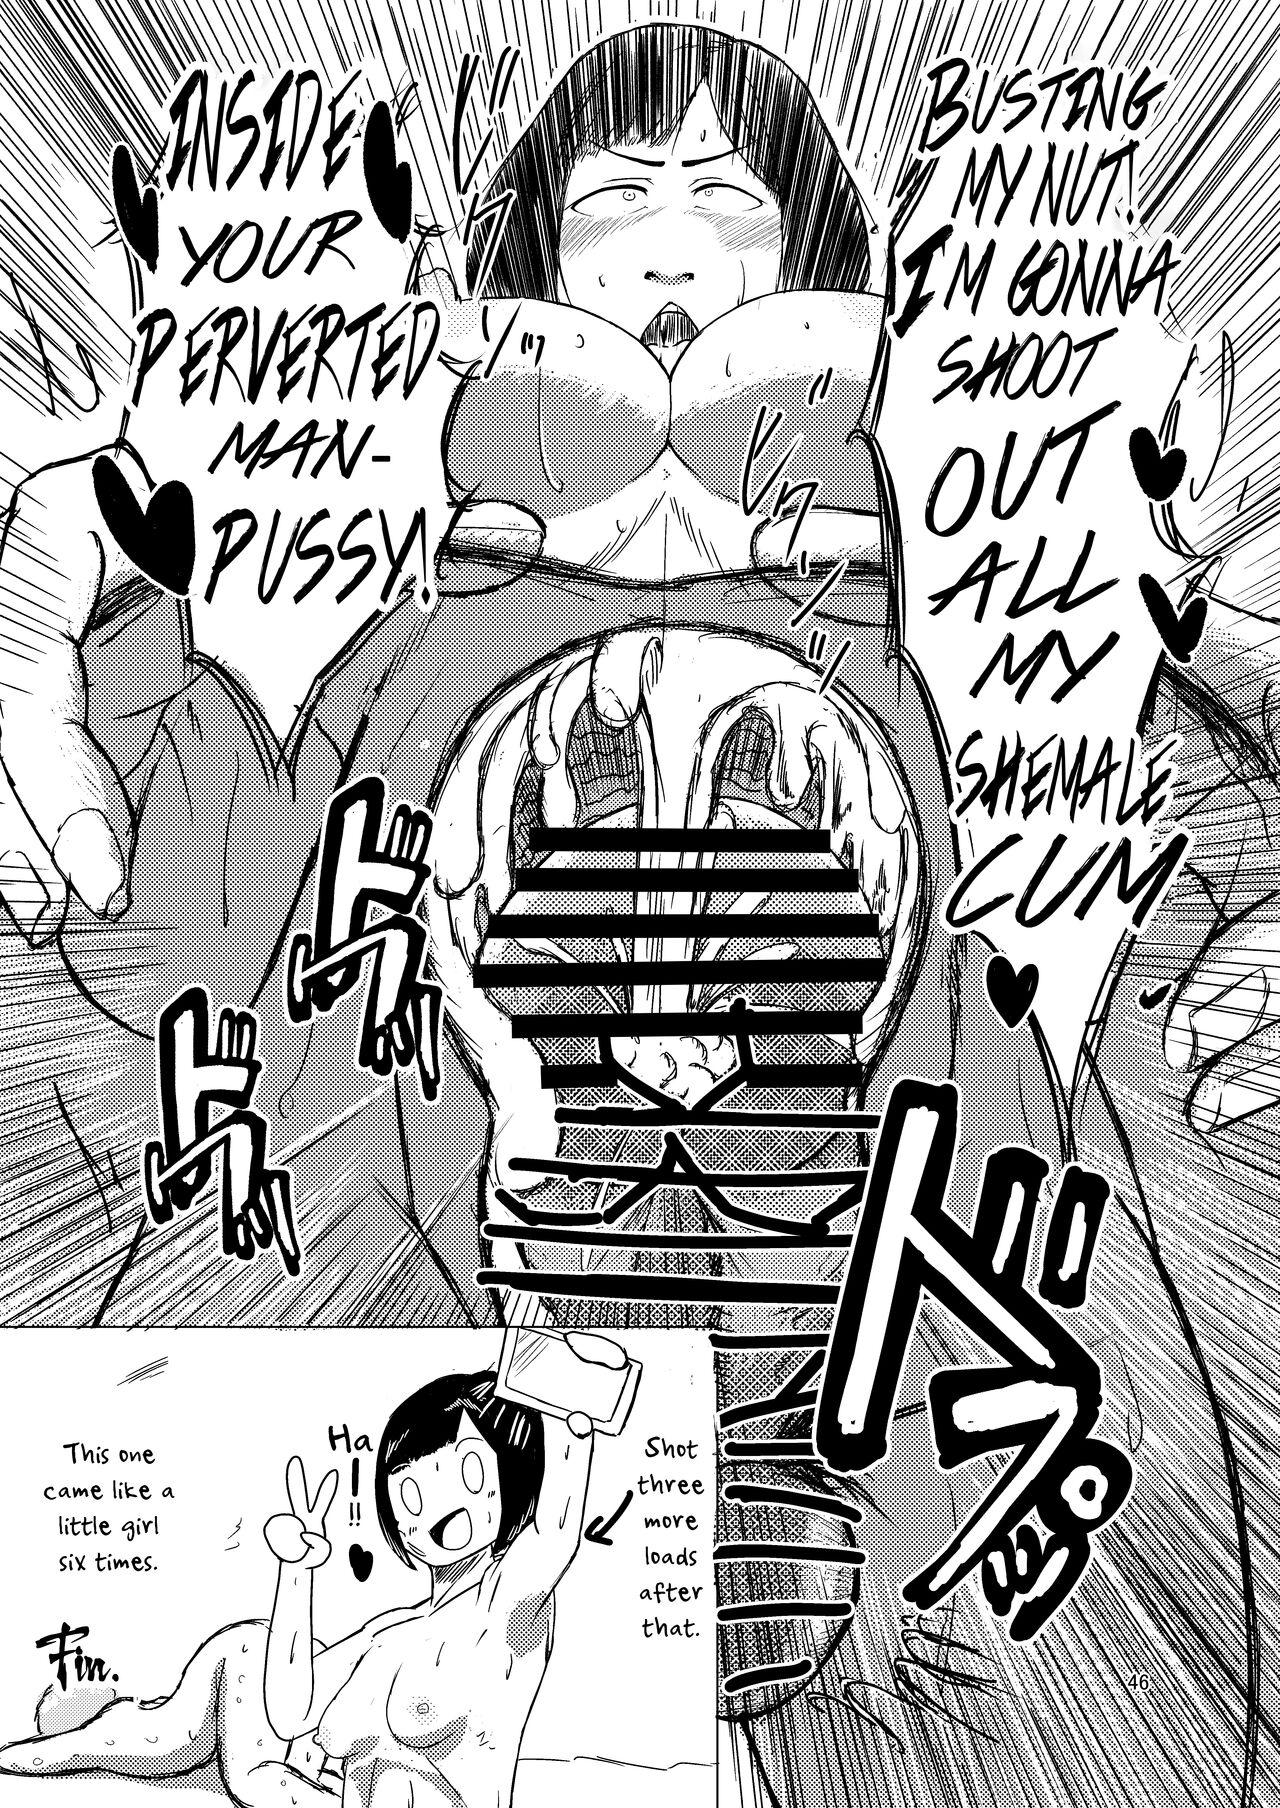 Pussyeating Pages 41-52 of Shemale & Mesu Danshi Goudoushi SHEMALE C's HAVEN 2 Lezdom - Page 6